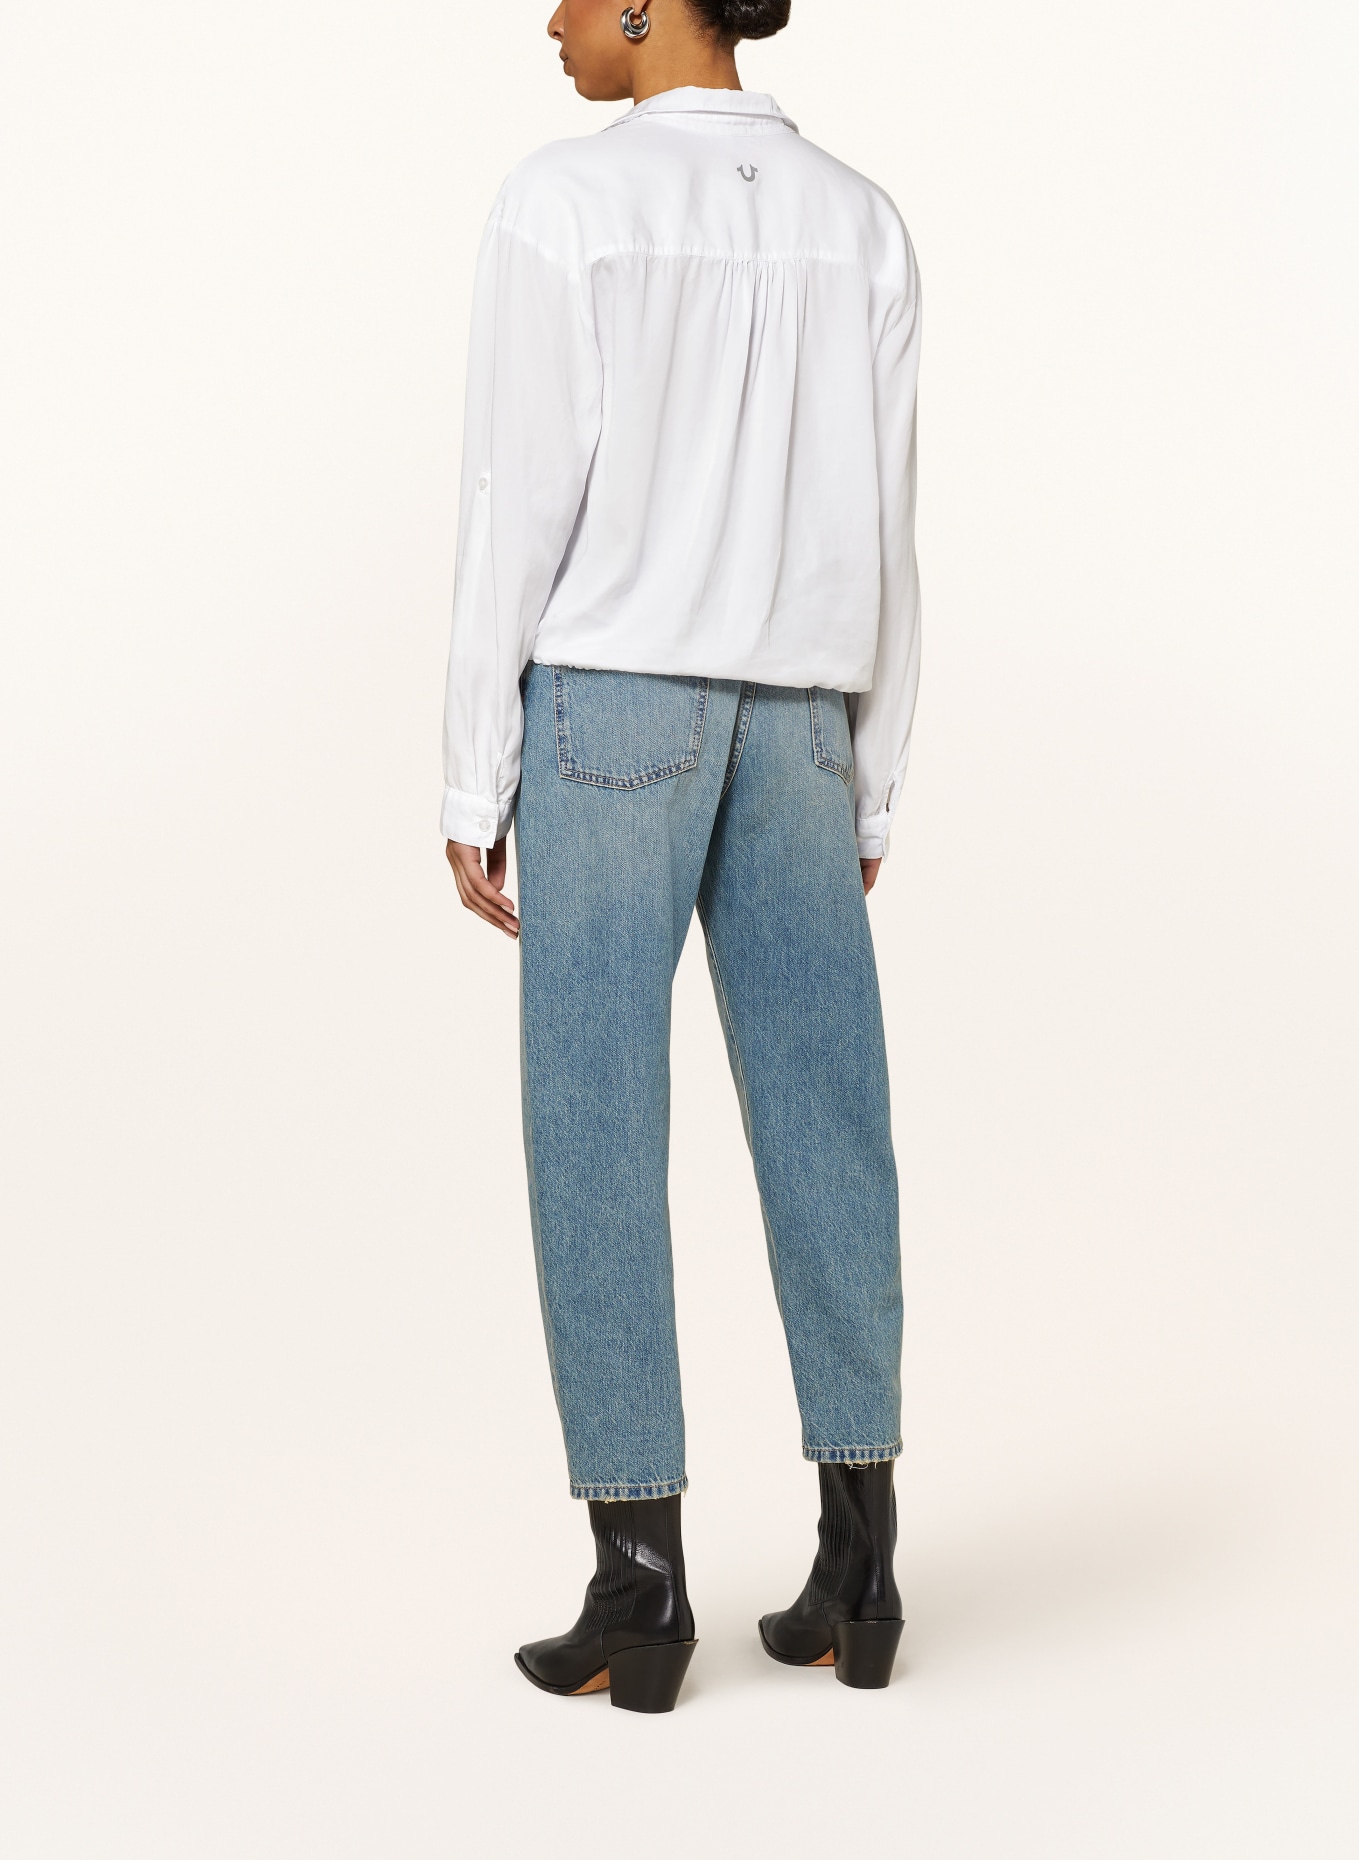 TRUE RELIGION Shirt blouse with ruffles, Color: WHITE (Image 3)